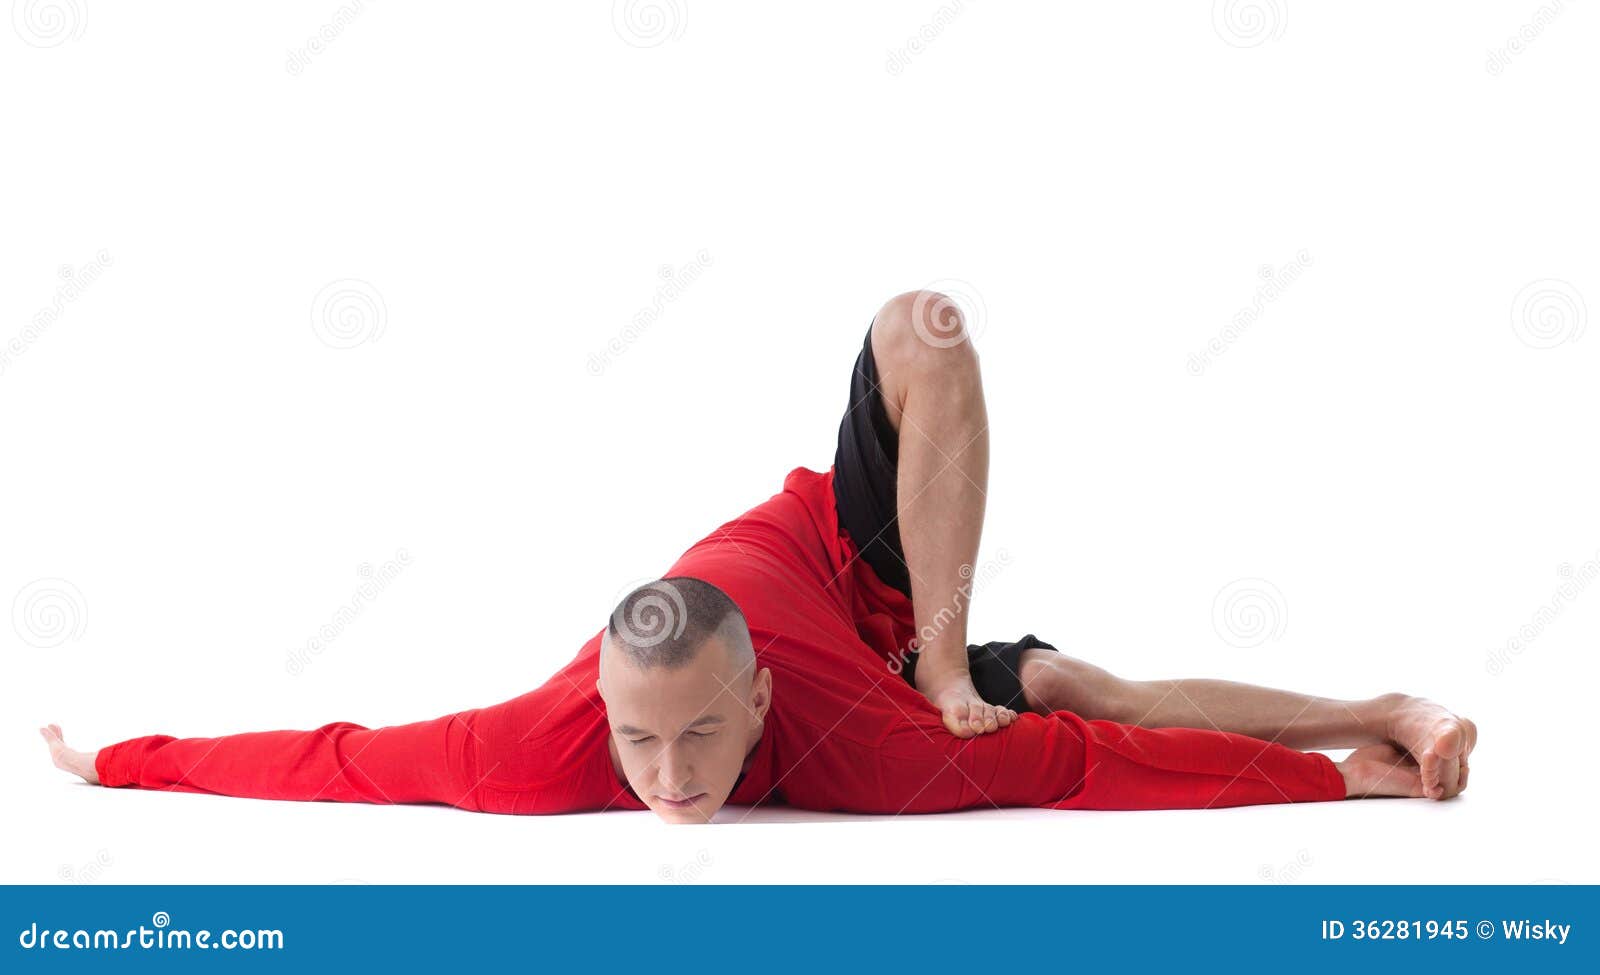 https://thumbs.dreamstime.com/z/flexible-man-posing-difficult-yoga-pose-middle-aged-36281945.jpg